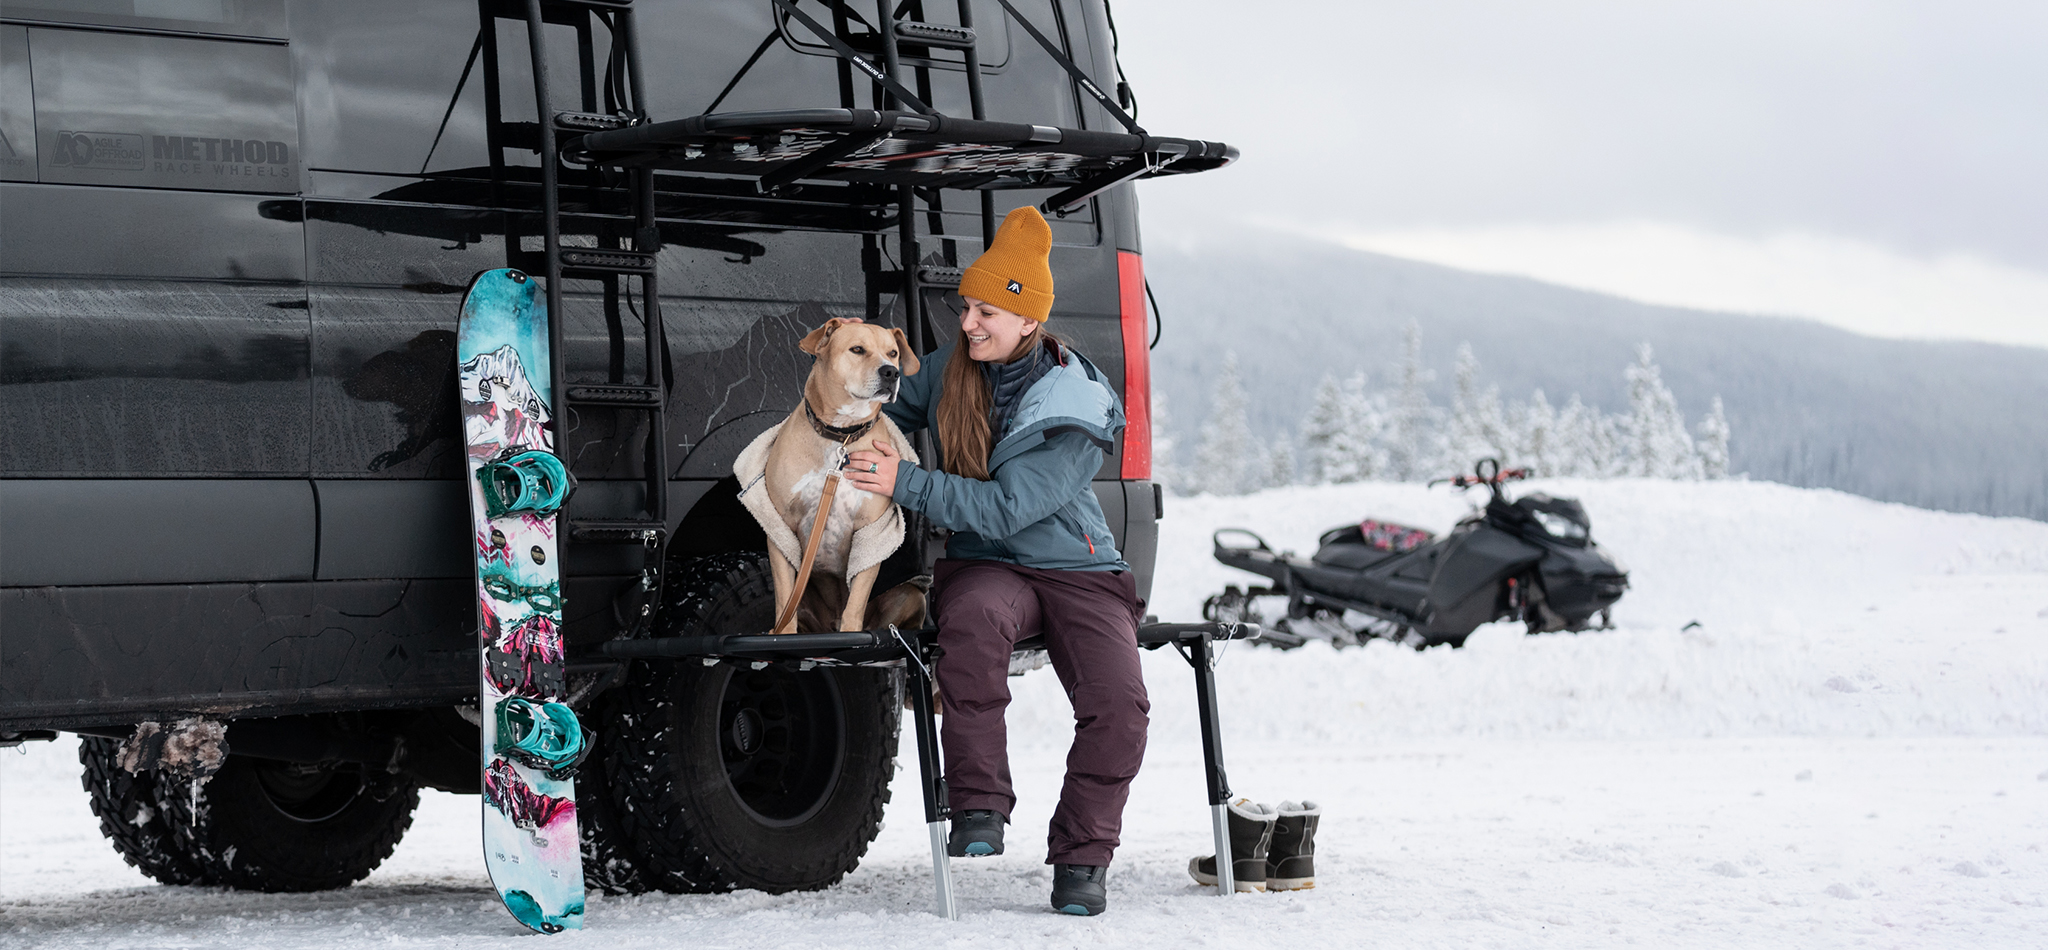 A woman smiles and pets her dog sitting on the edge of her customized Sprinter van conversion, with a snowboard and snowmobile nearby.